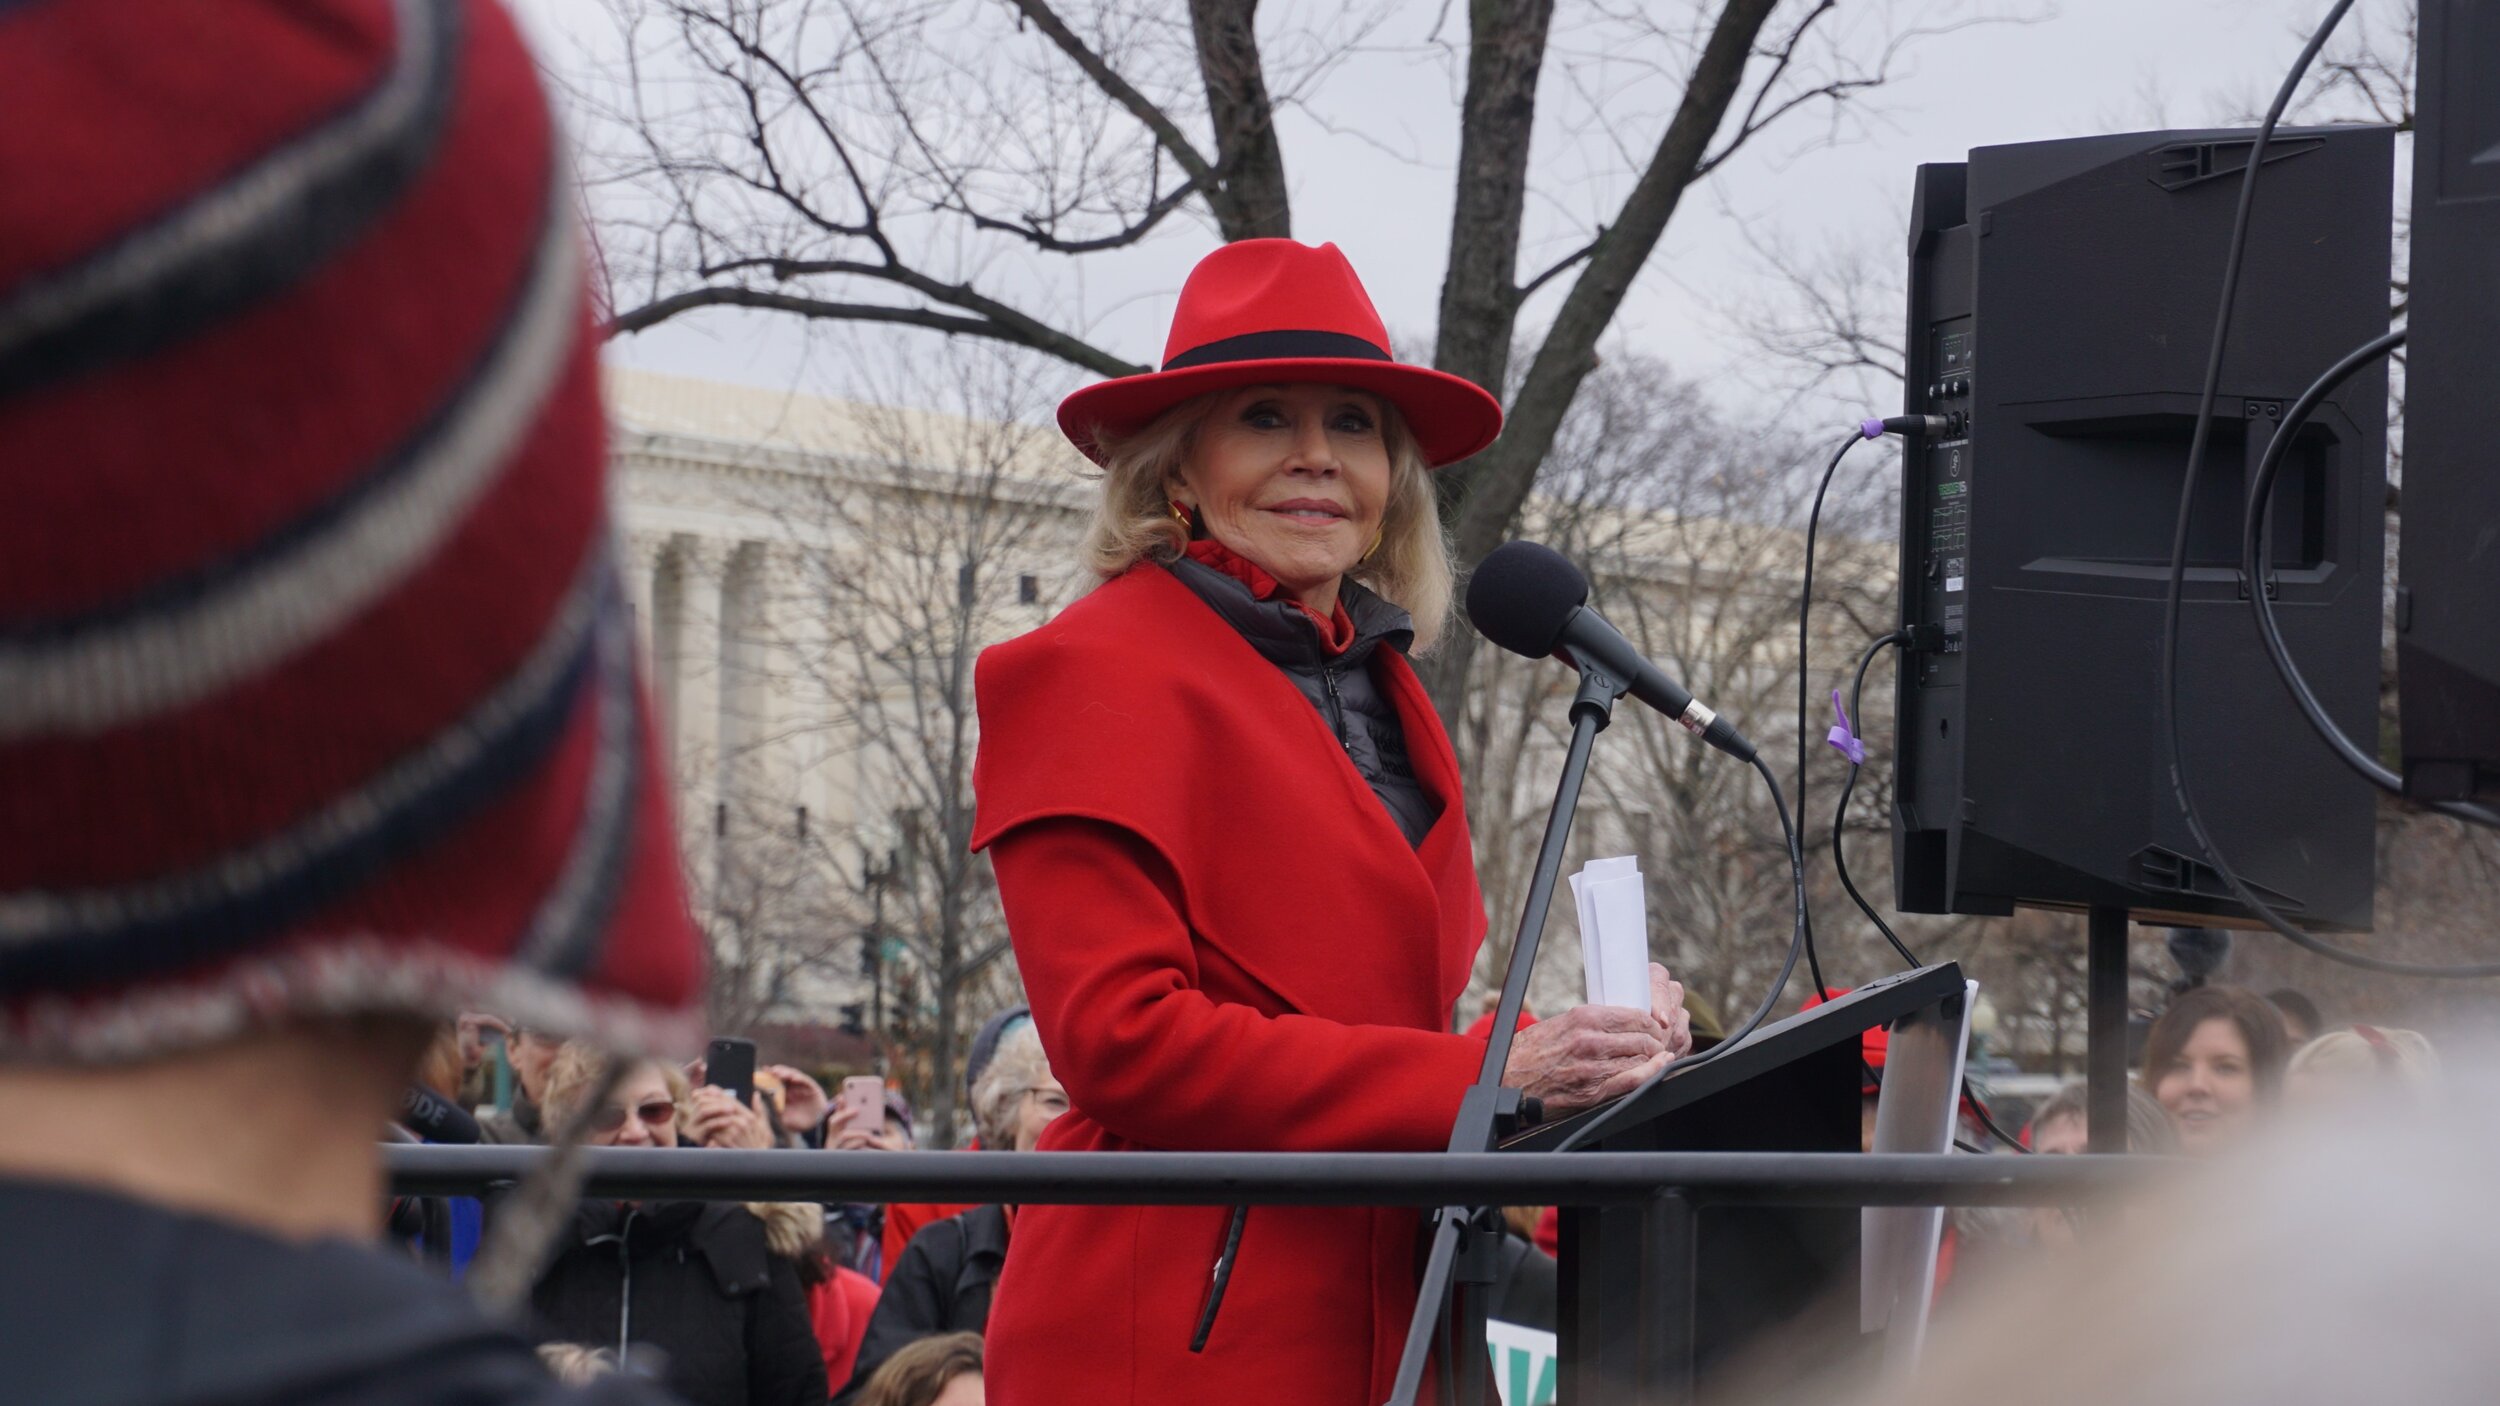 Fonda claims her red coat is the last piece of clothing she will buy   Credit: Kristen Locy